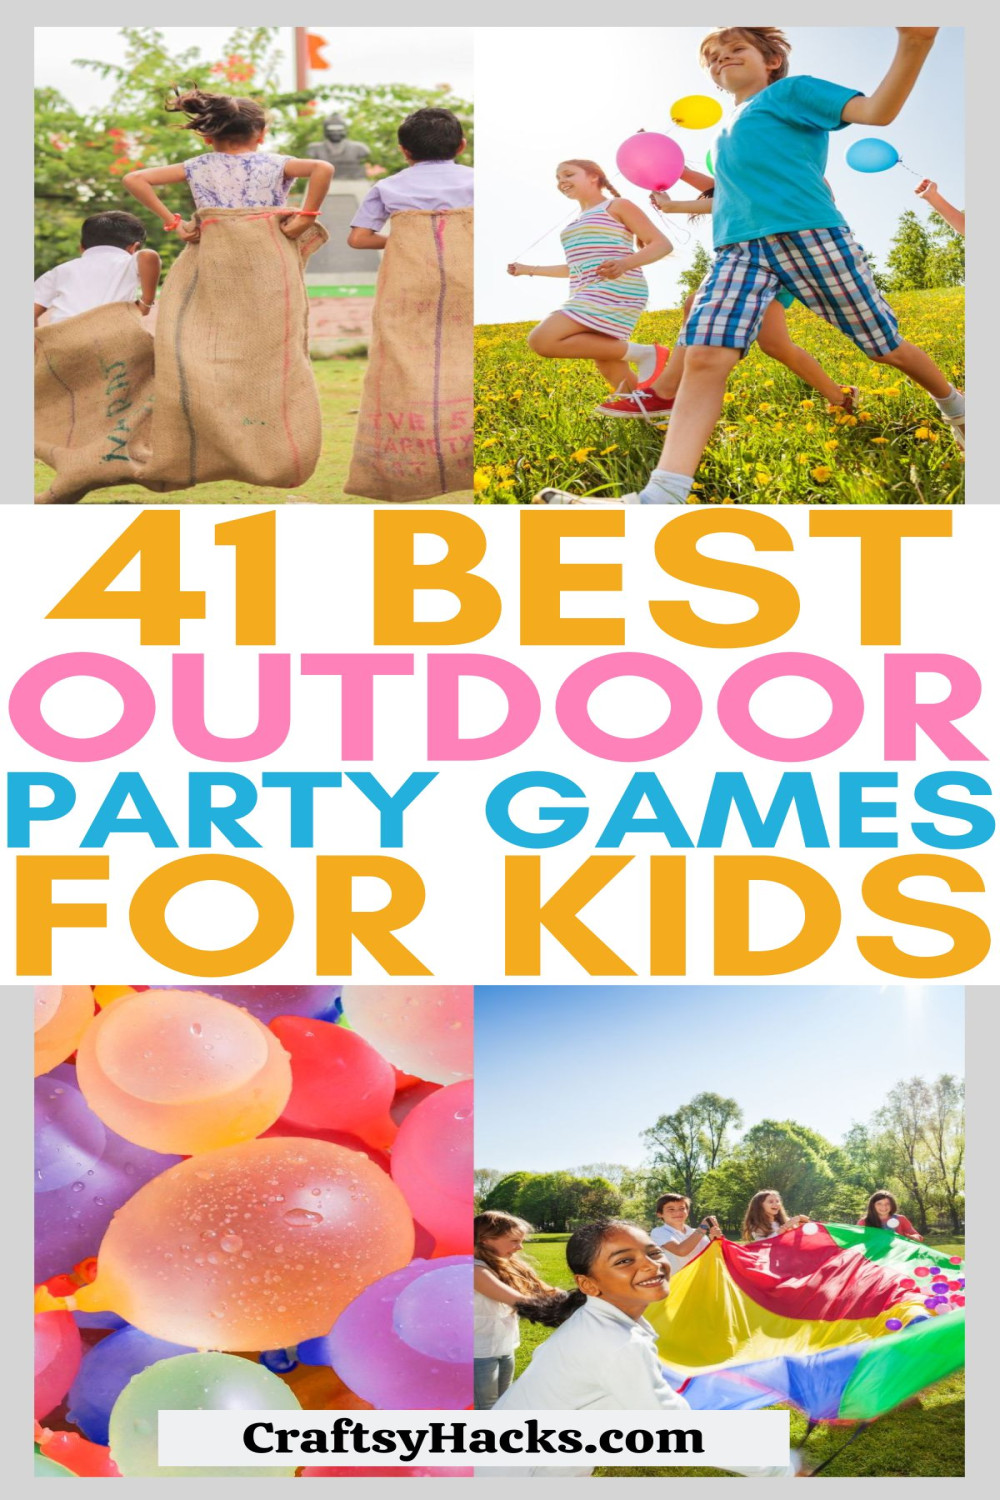 Best Outdoor Party Games for Kids Birthday - Craftsy Hacks